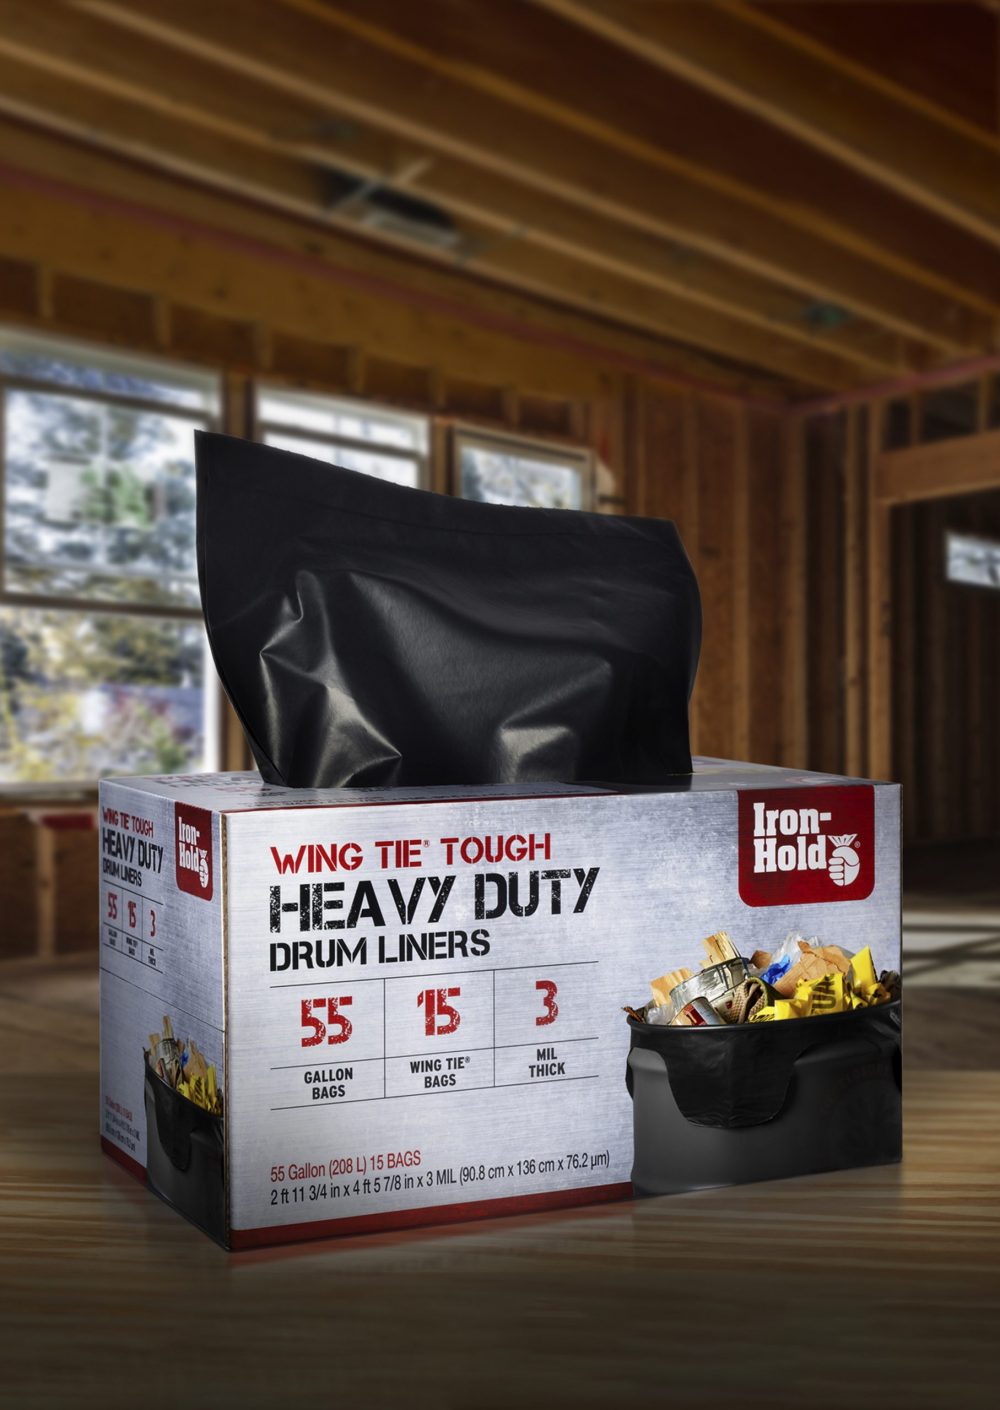 Trash Bag Packaging Re-Design for Iron-Hold - Porchlight